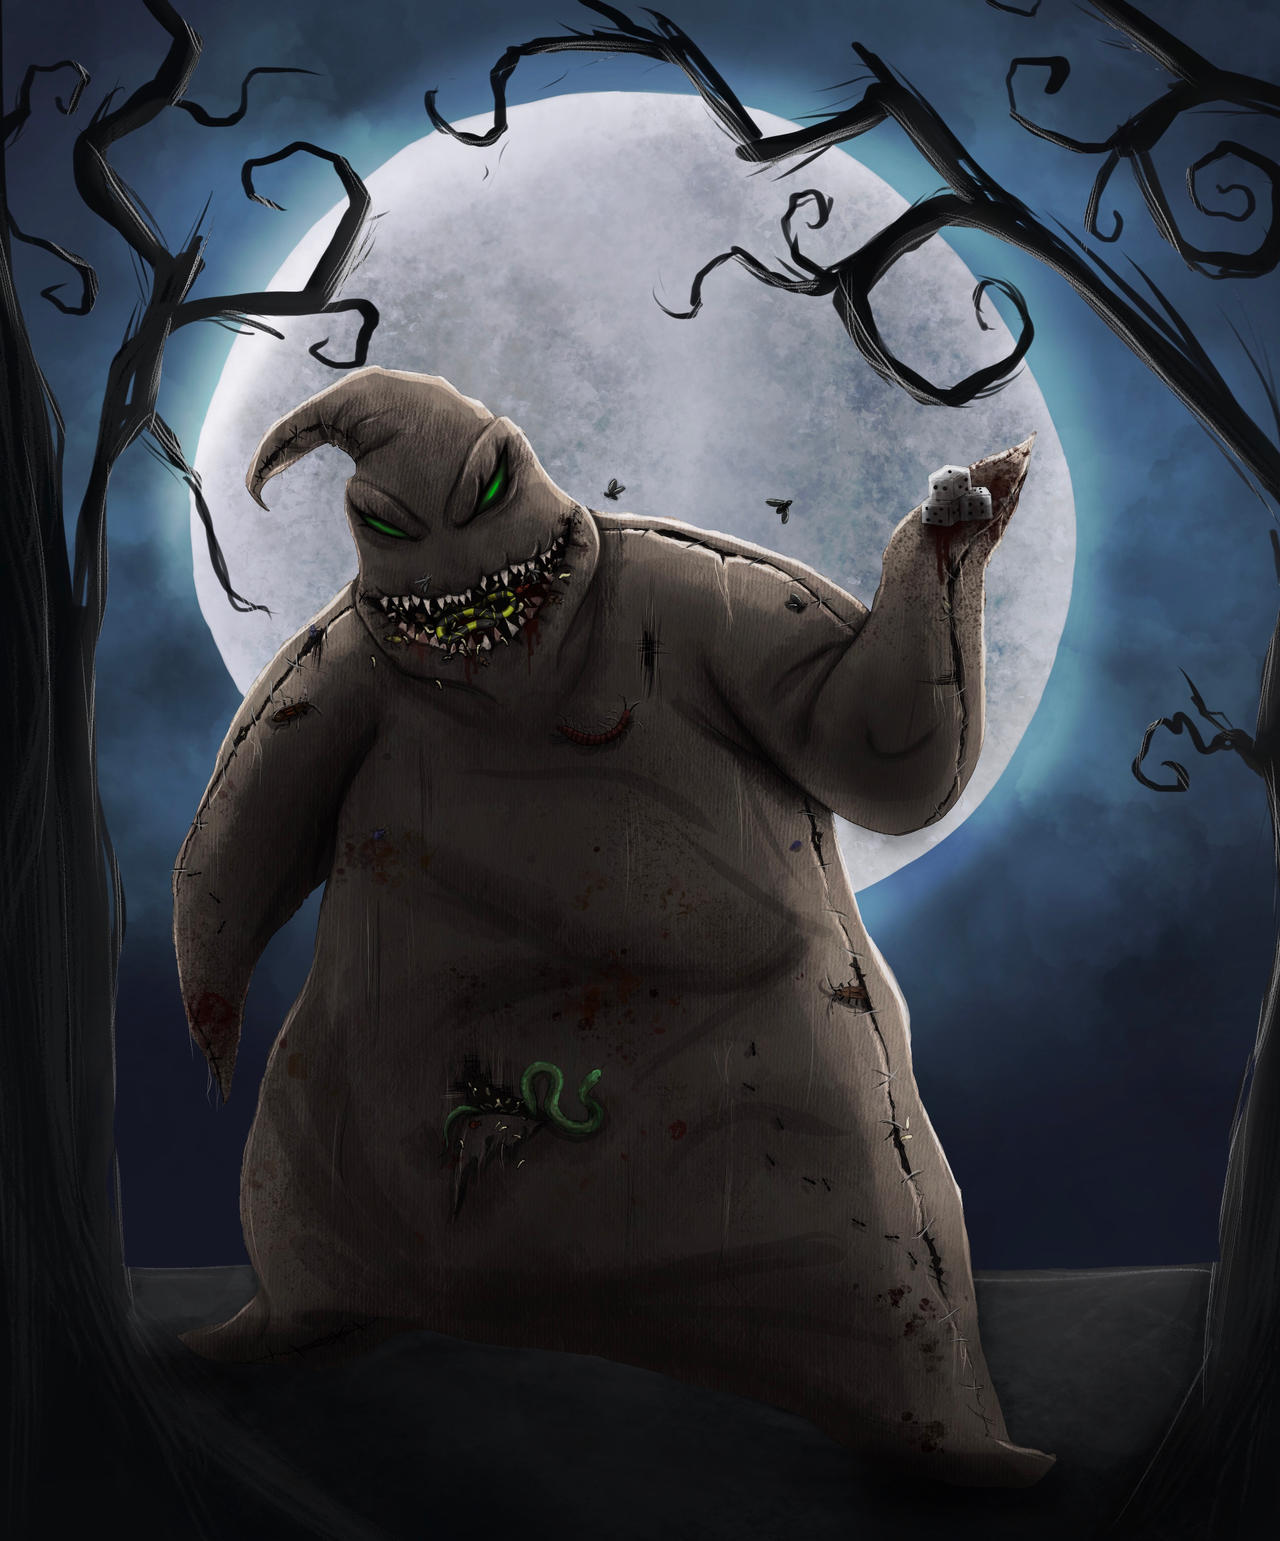 A Nightmare Before Christmas- Oogie Boogie by CaityKitty13 on